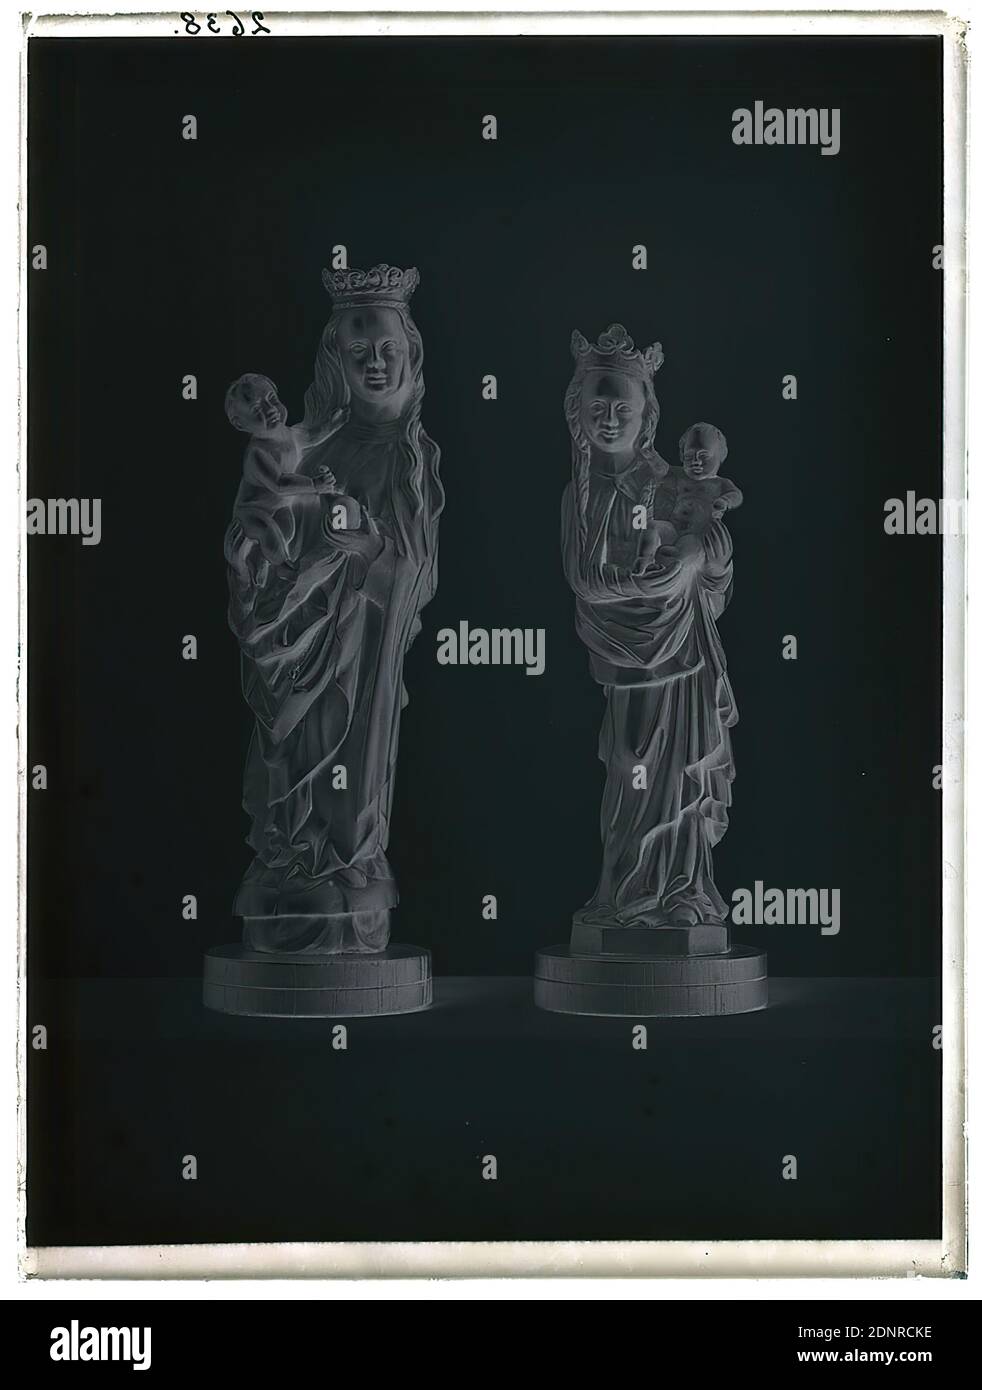 Wilhelm Weimar, Two Madonnas (fake), glass negative, black and white negative process, total: height: 23.8 cm; width: 17.8 cm, numbered: top left: in black ink: 2638. sculpture, sculpture, sculptures, sculpture art, Mary with Christ Child (Madonna), church furnishings, A further 1000 glass negatives were created as part of an inventory of Hamburg monuments, which Justus Brinckmann produced on behalf of the Hamburg High School Authority Stock Photo